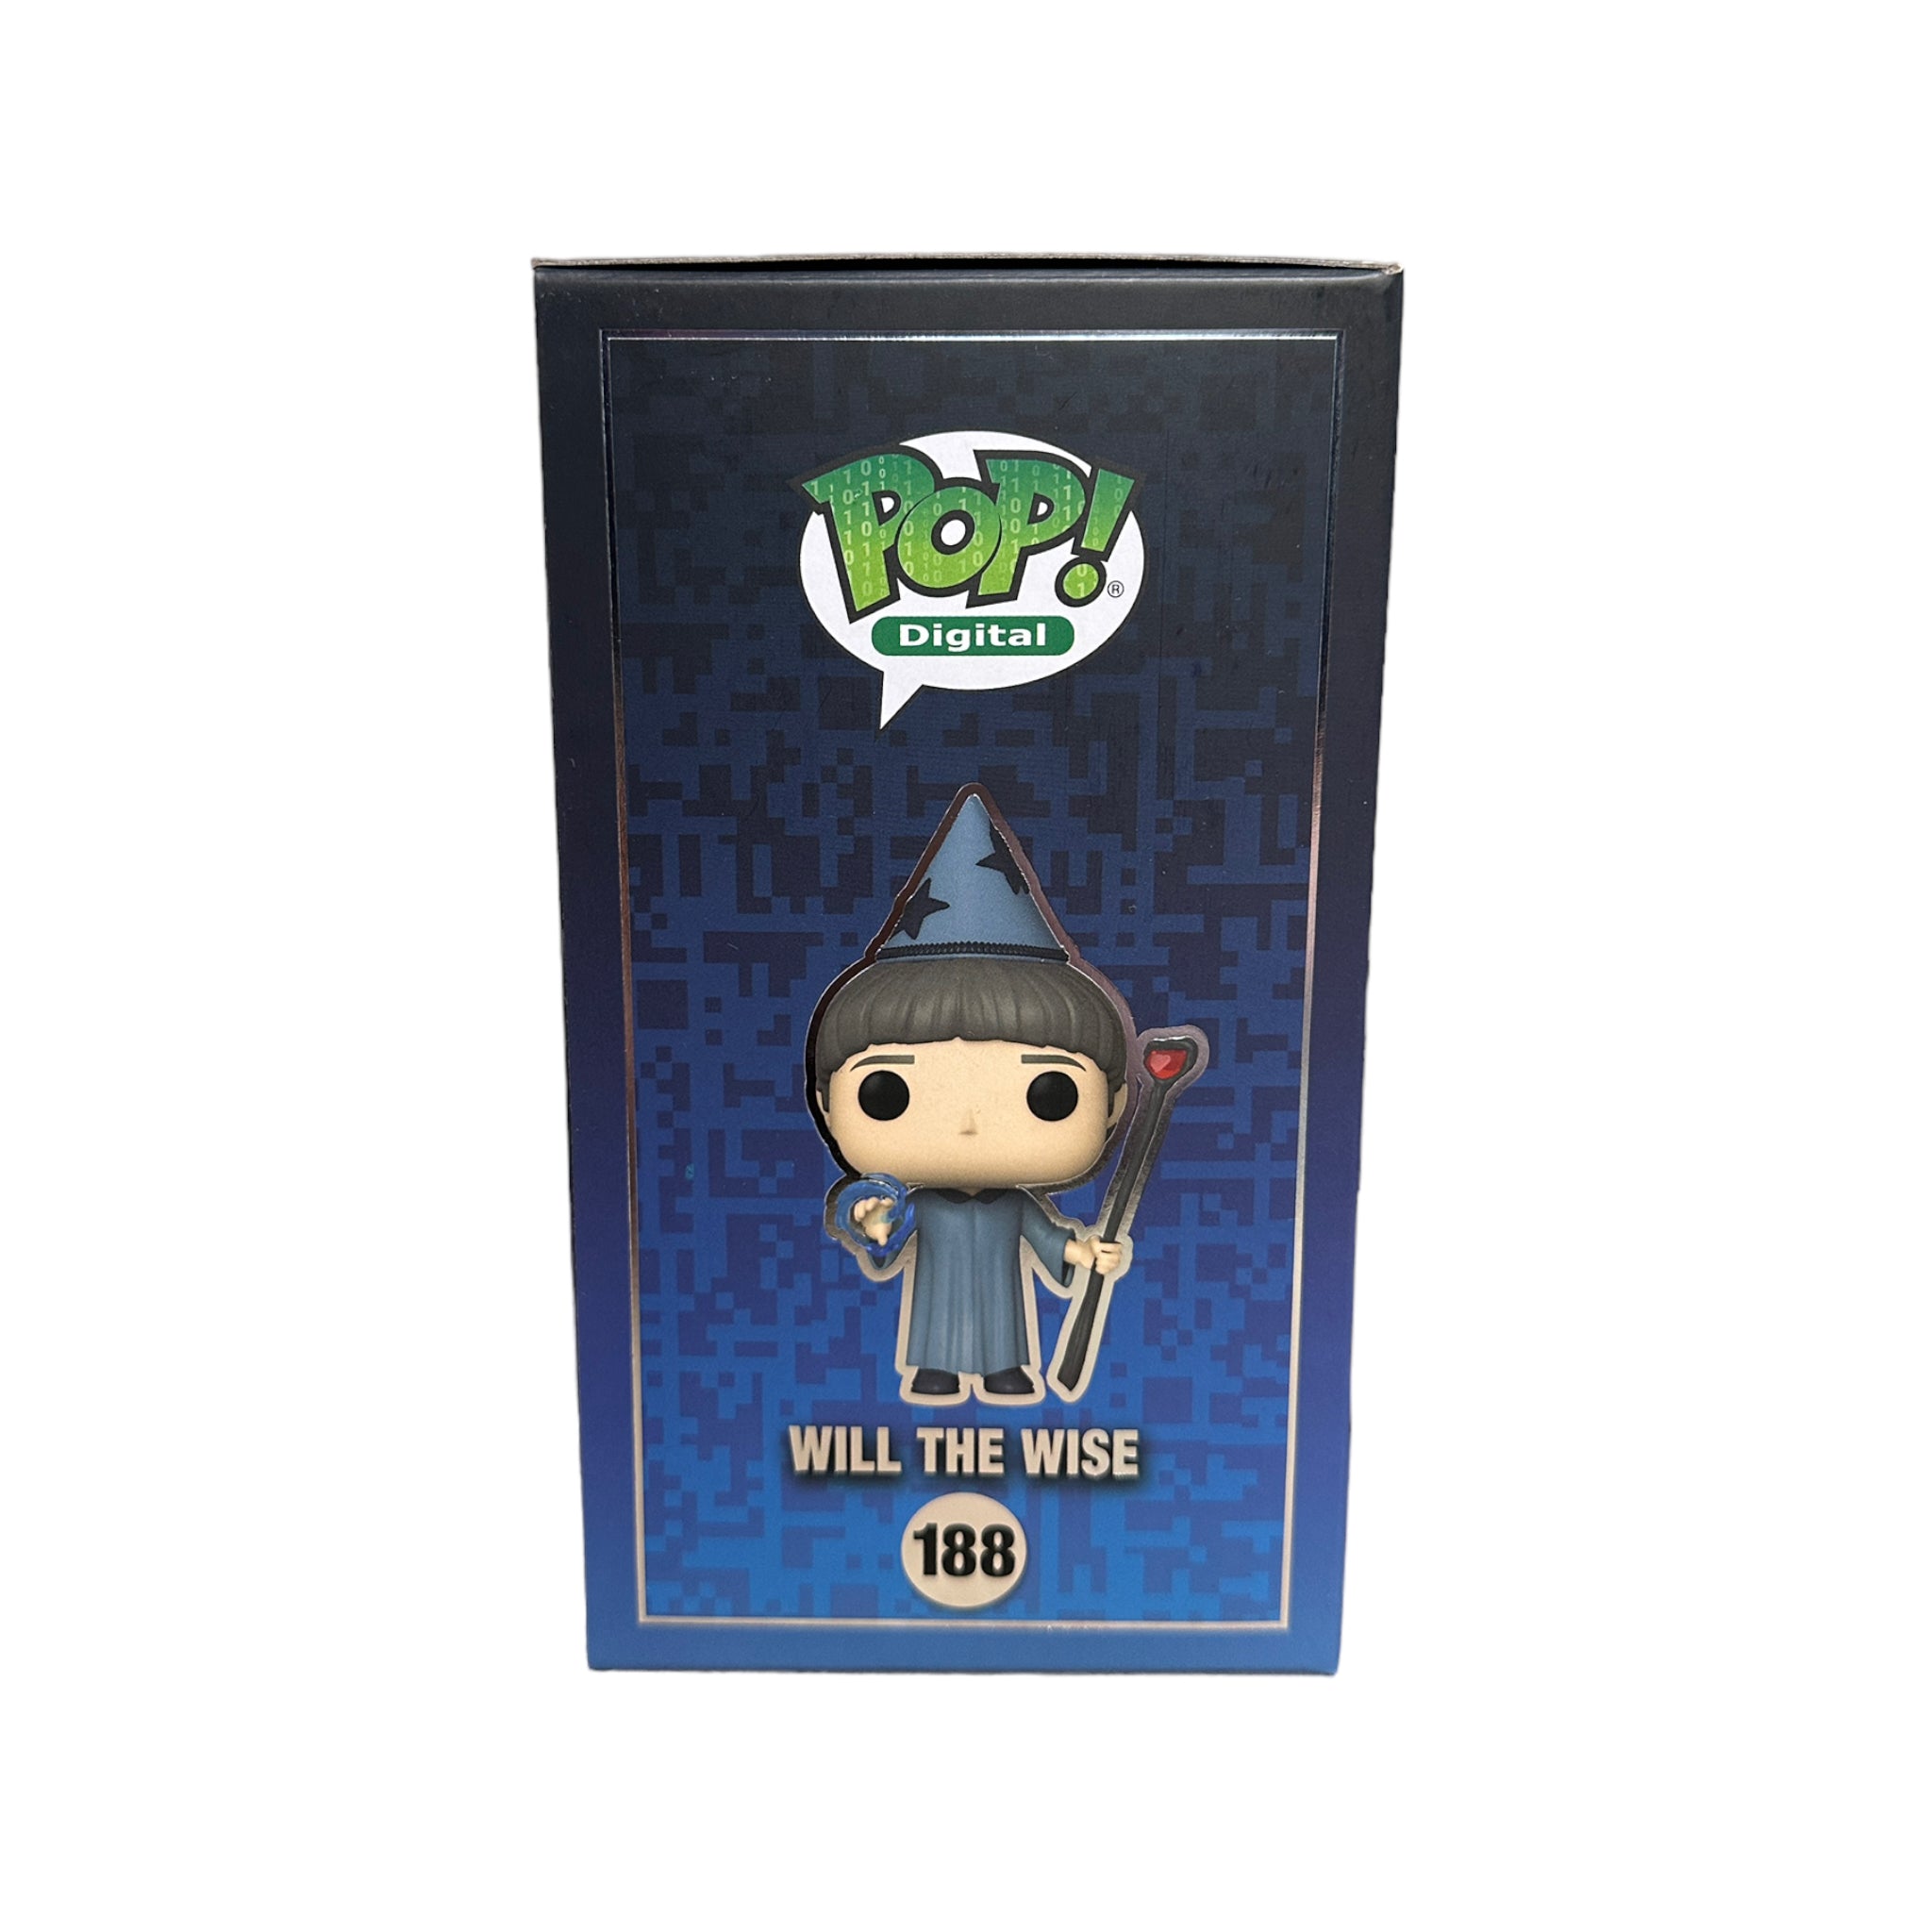 Will The Wise #188 Funko Pop! - Stranger Things - NFT Release Exclusive LE3000 Pcs - Condition 9.5/10